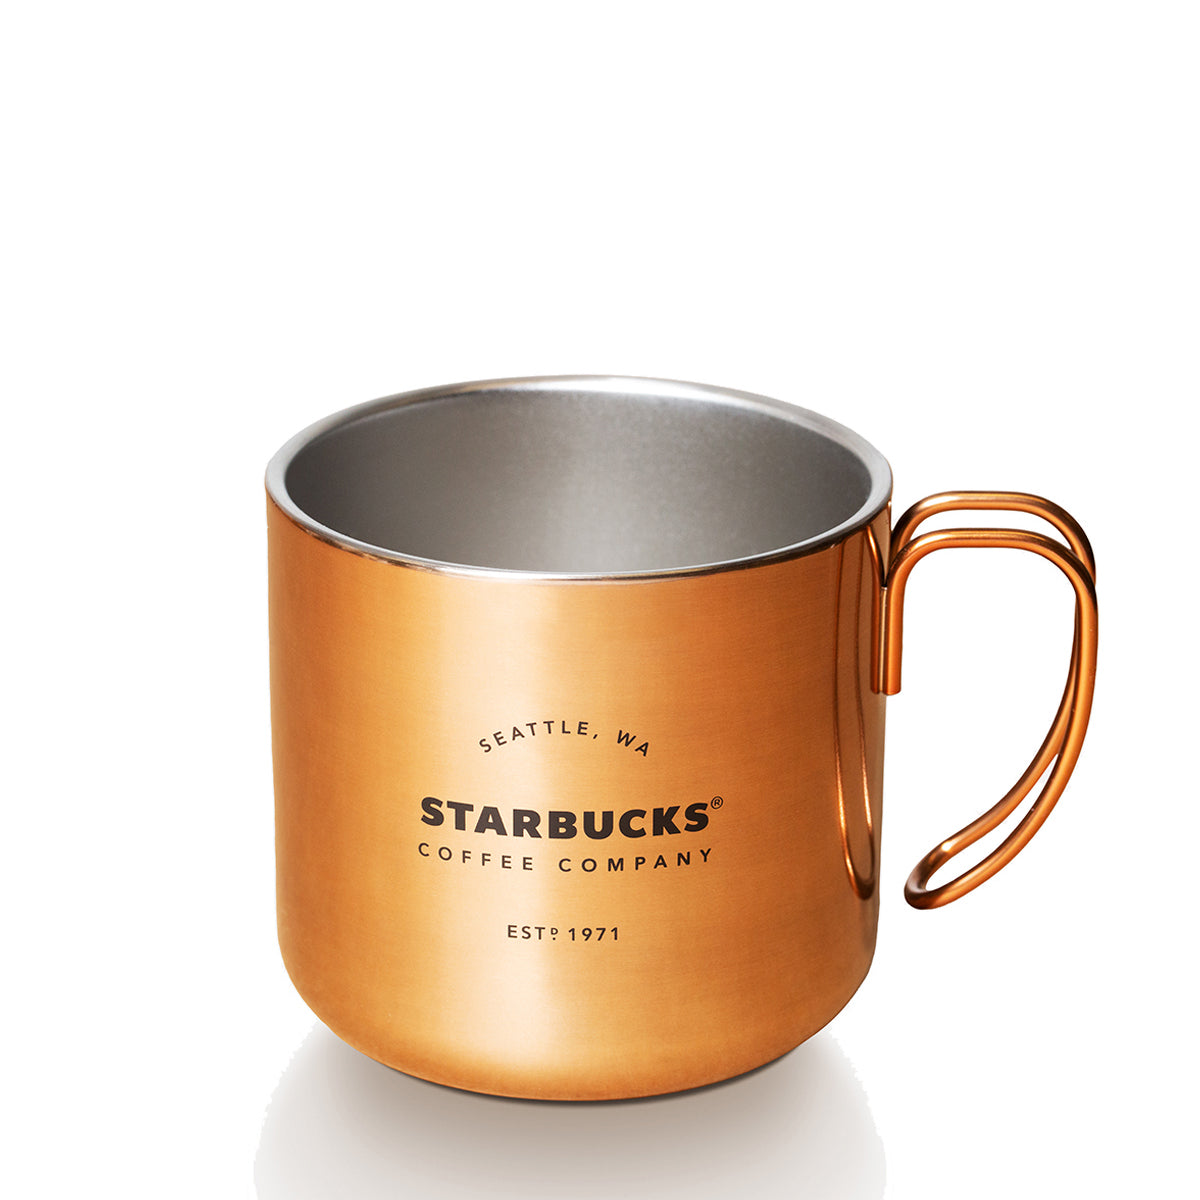 Stainless Steel Mug with Handle - Copper